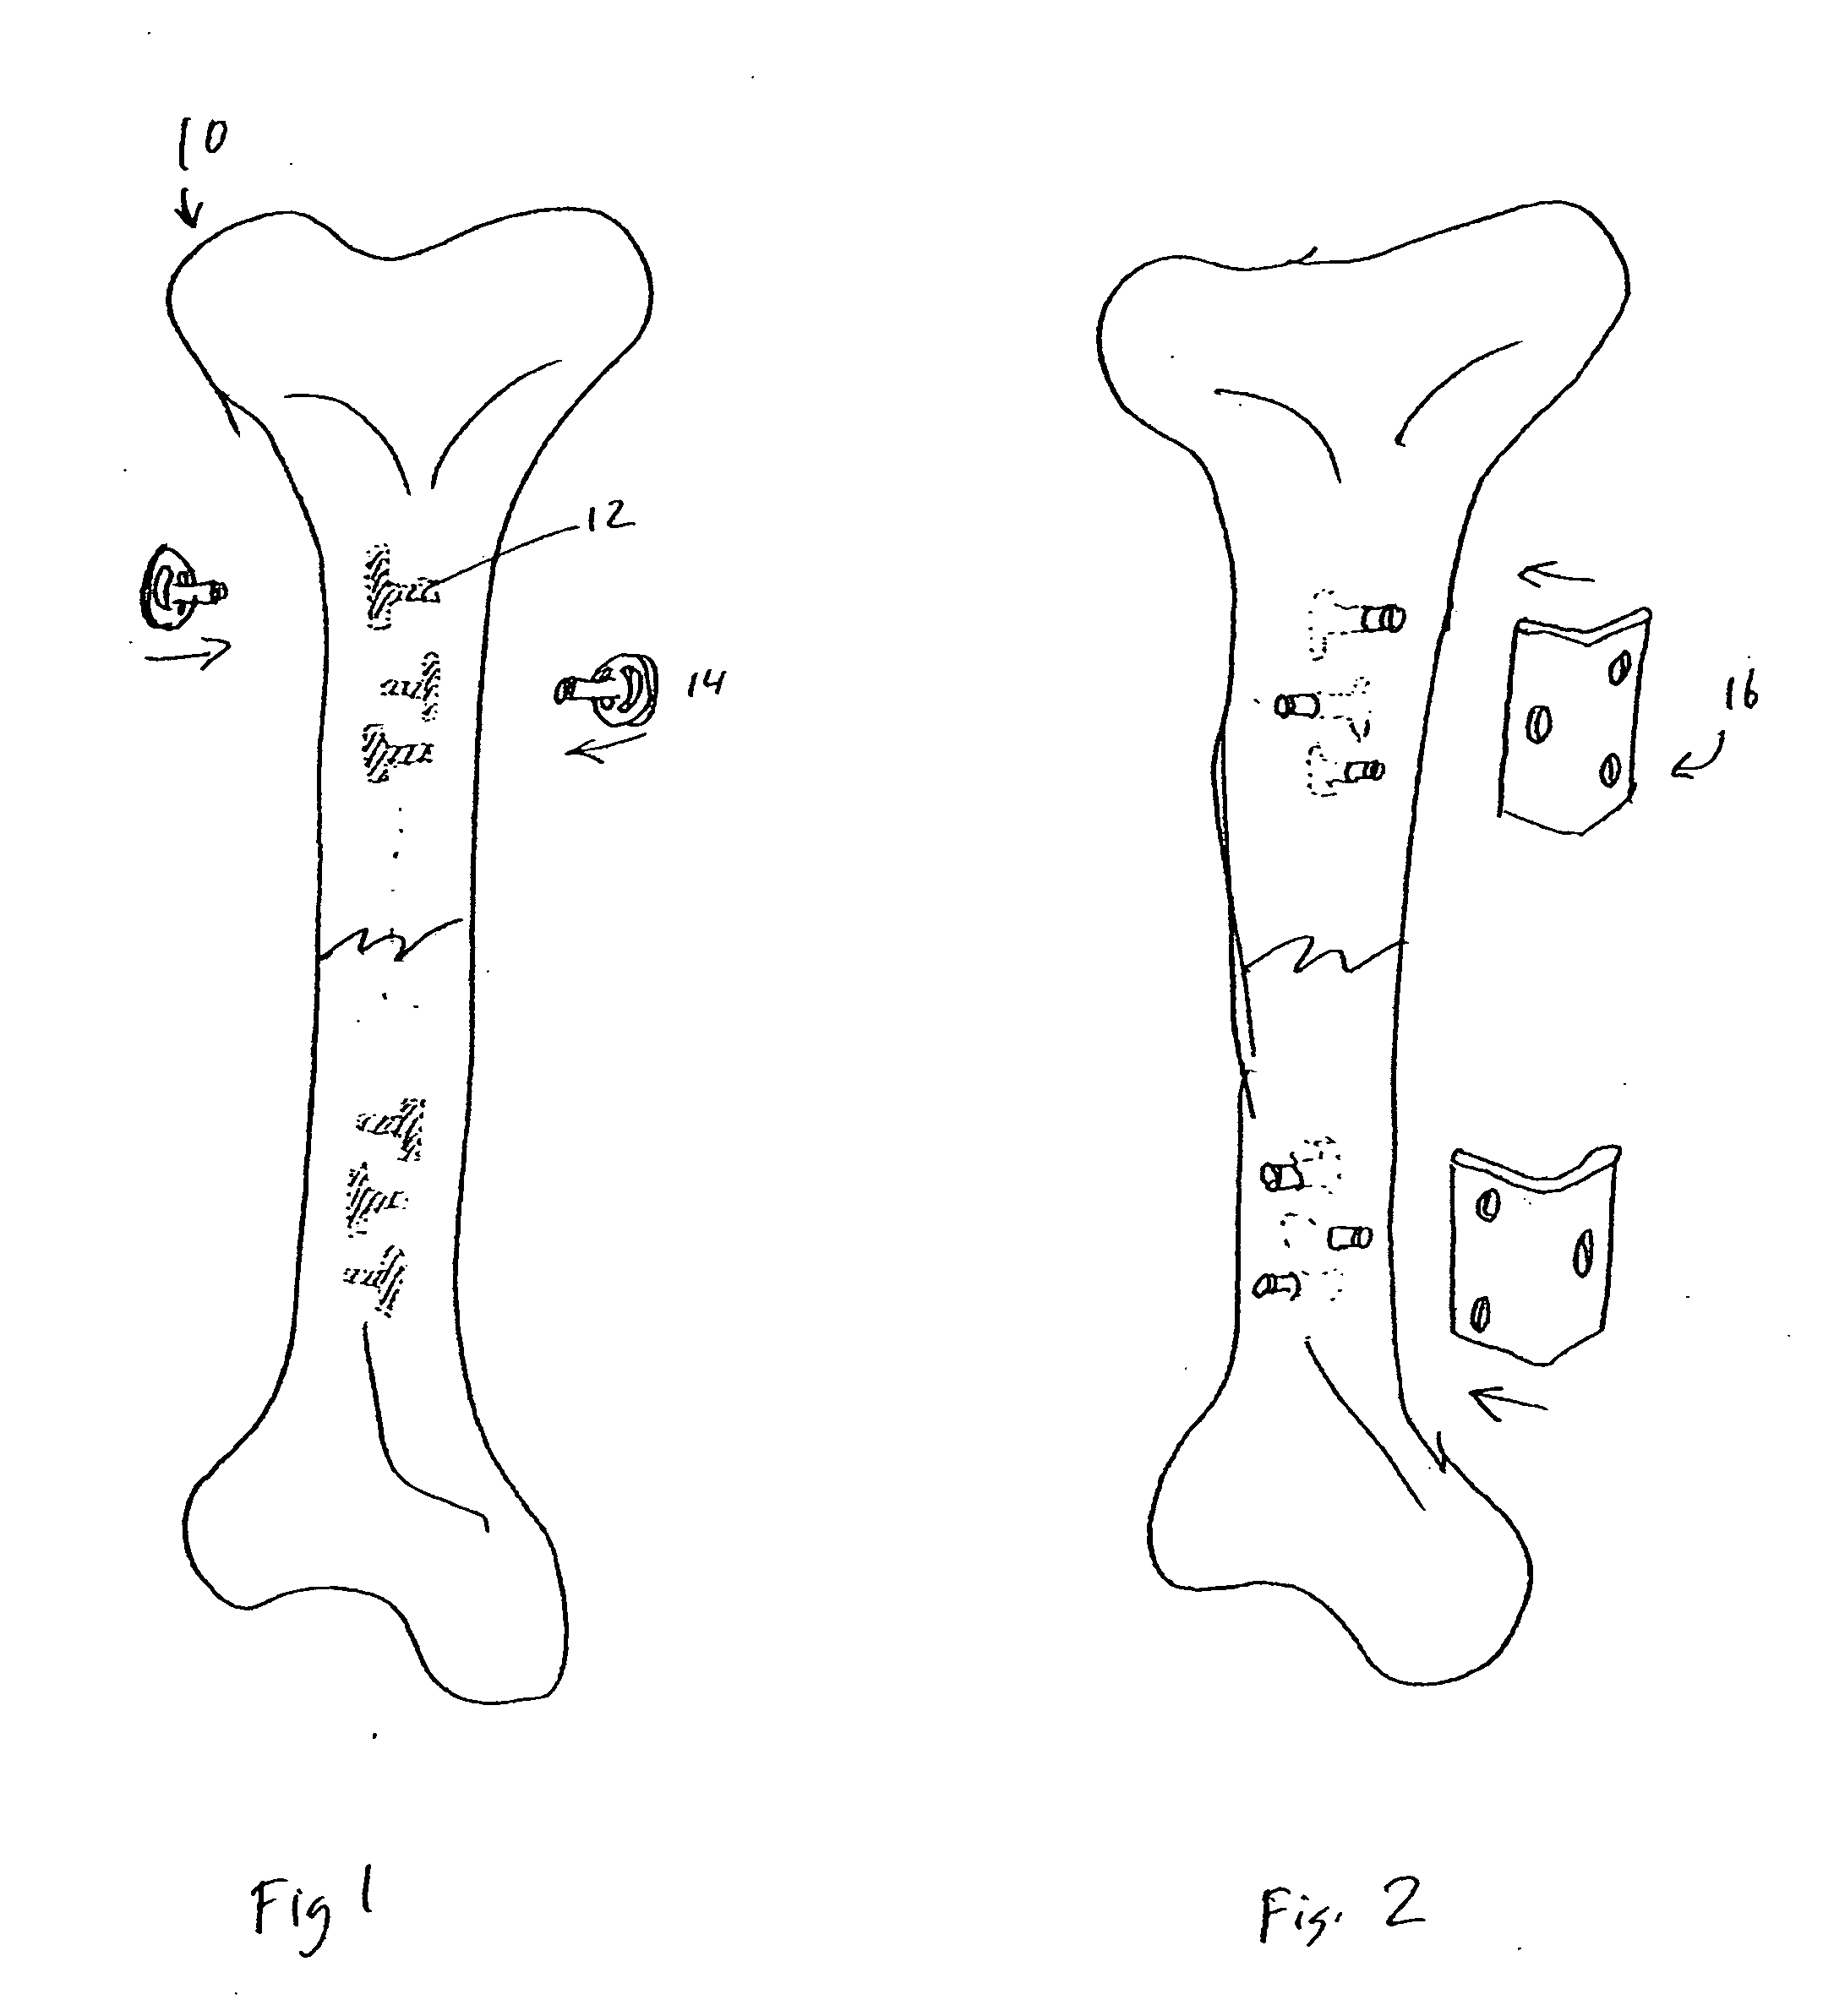 Lateral implant system and apparatus for reduction and reconstruction